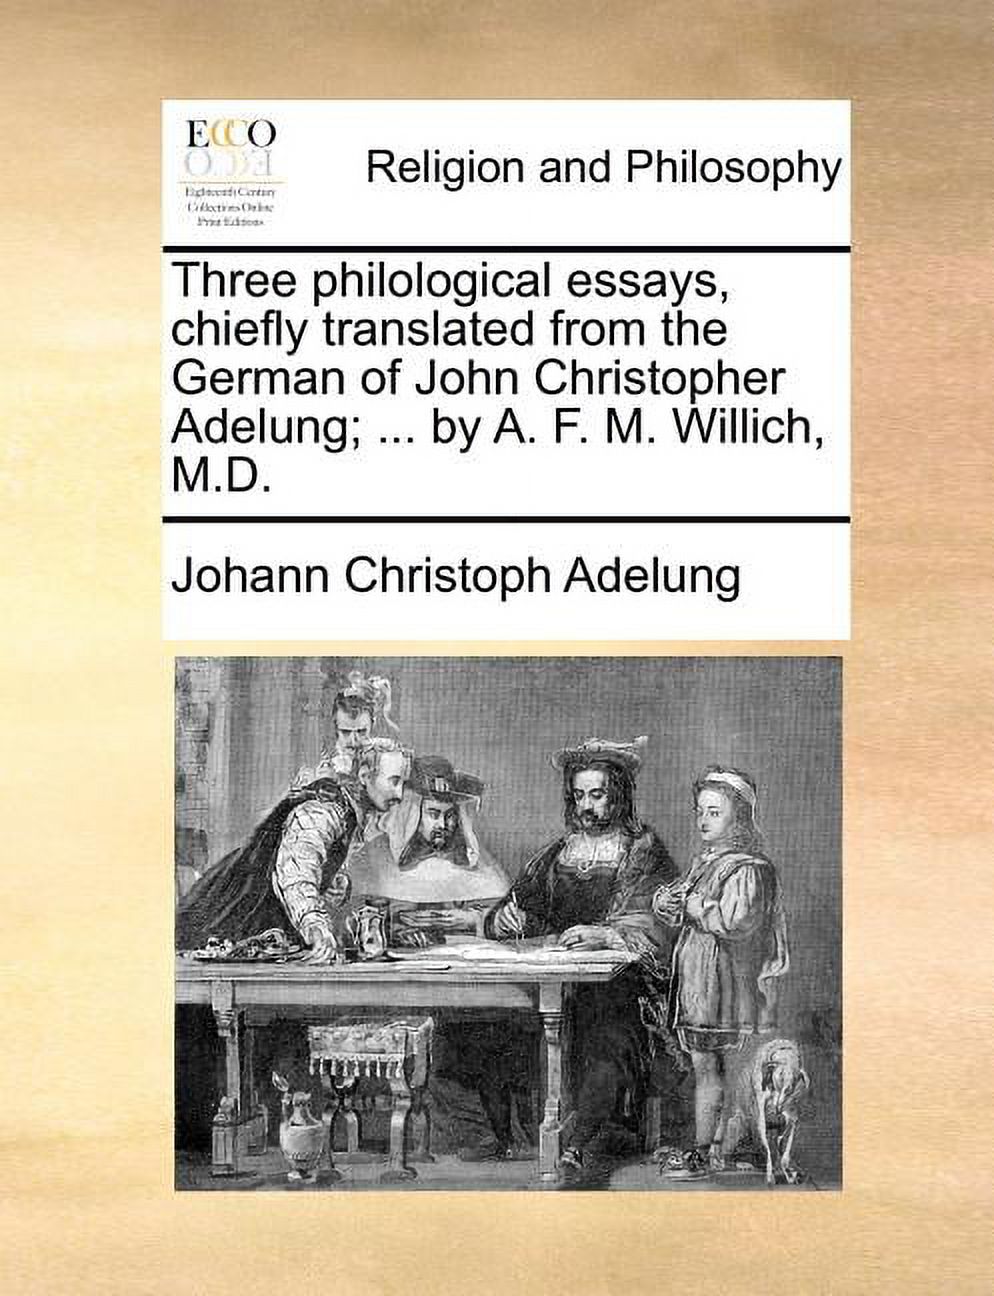 Three Philological Essays, Chiefly Translated from the German of John Christopher Adelung; by A. F. M. Willich, M.D. (Paperback) - image 1 of 1